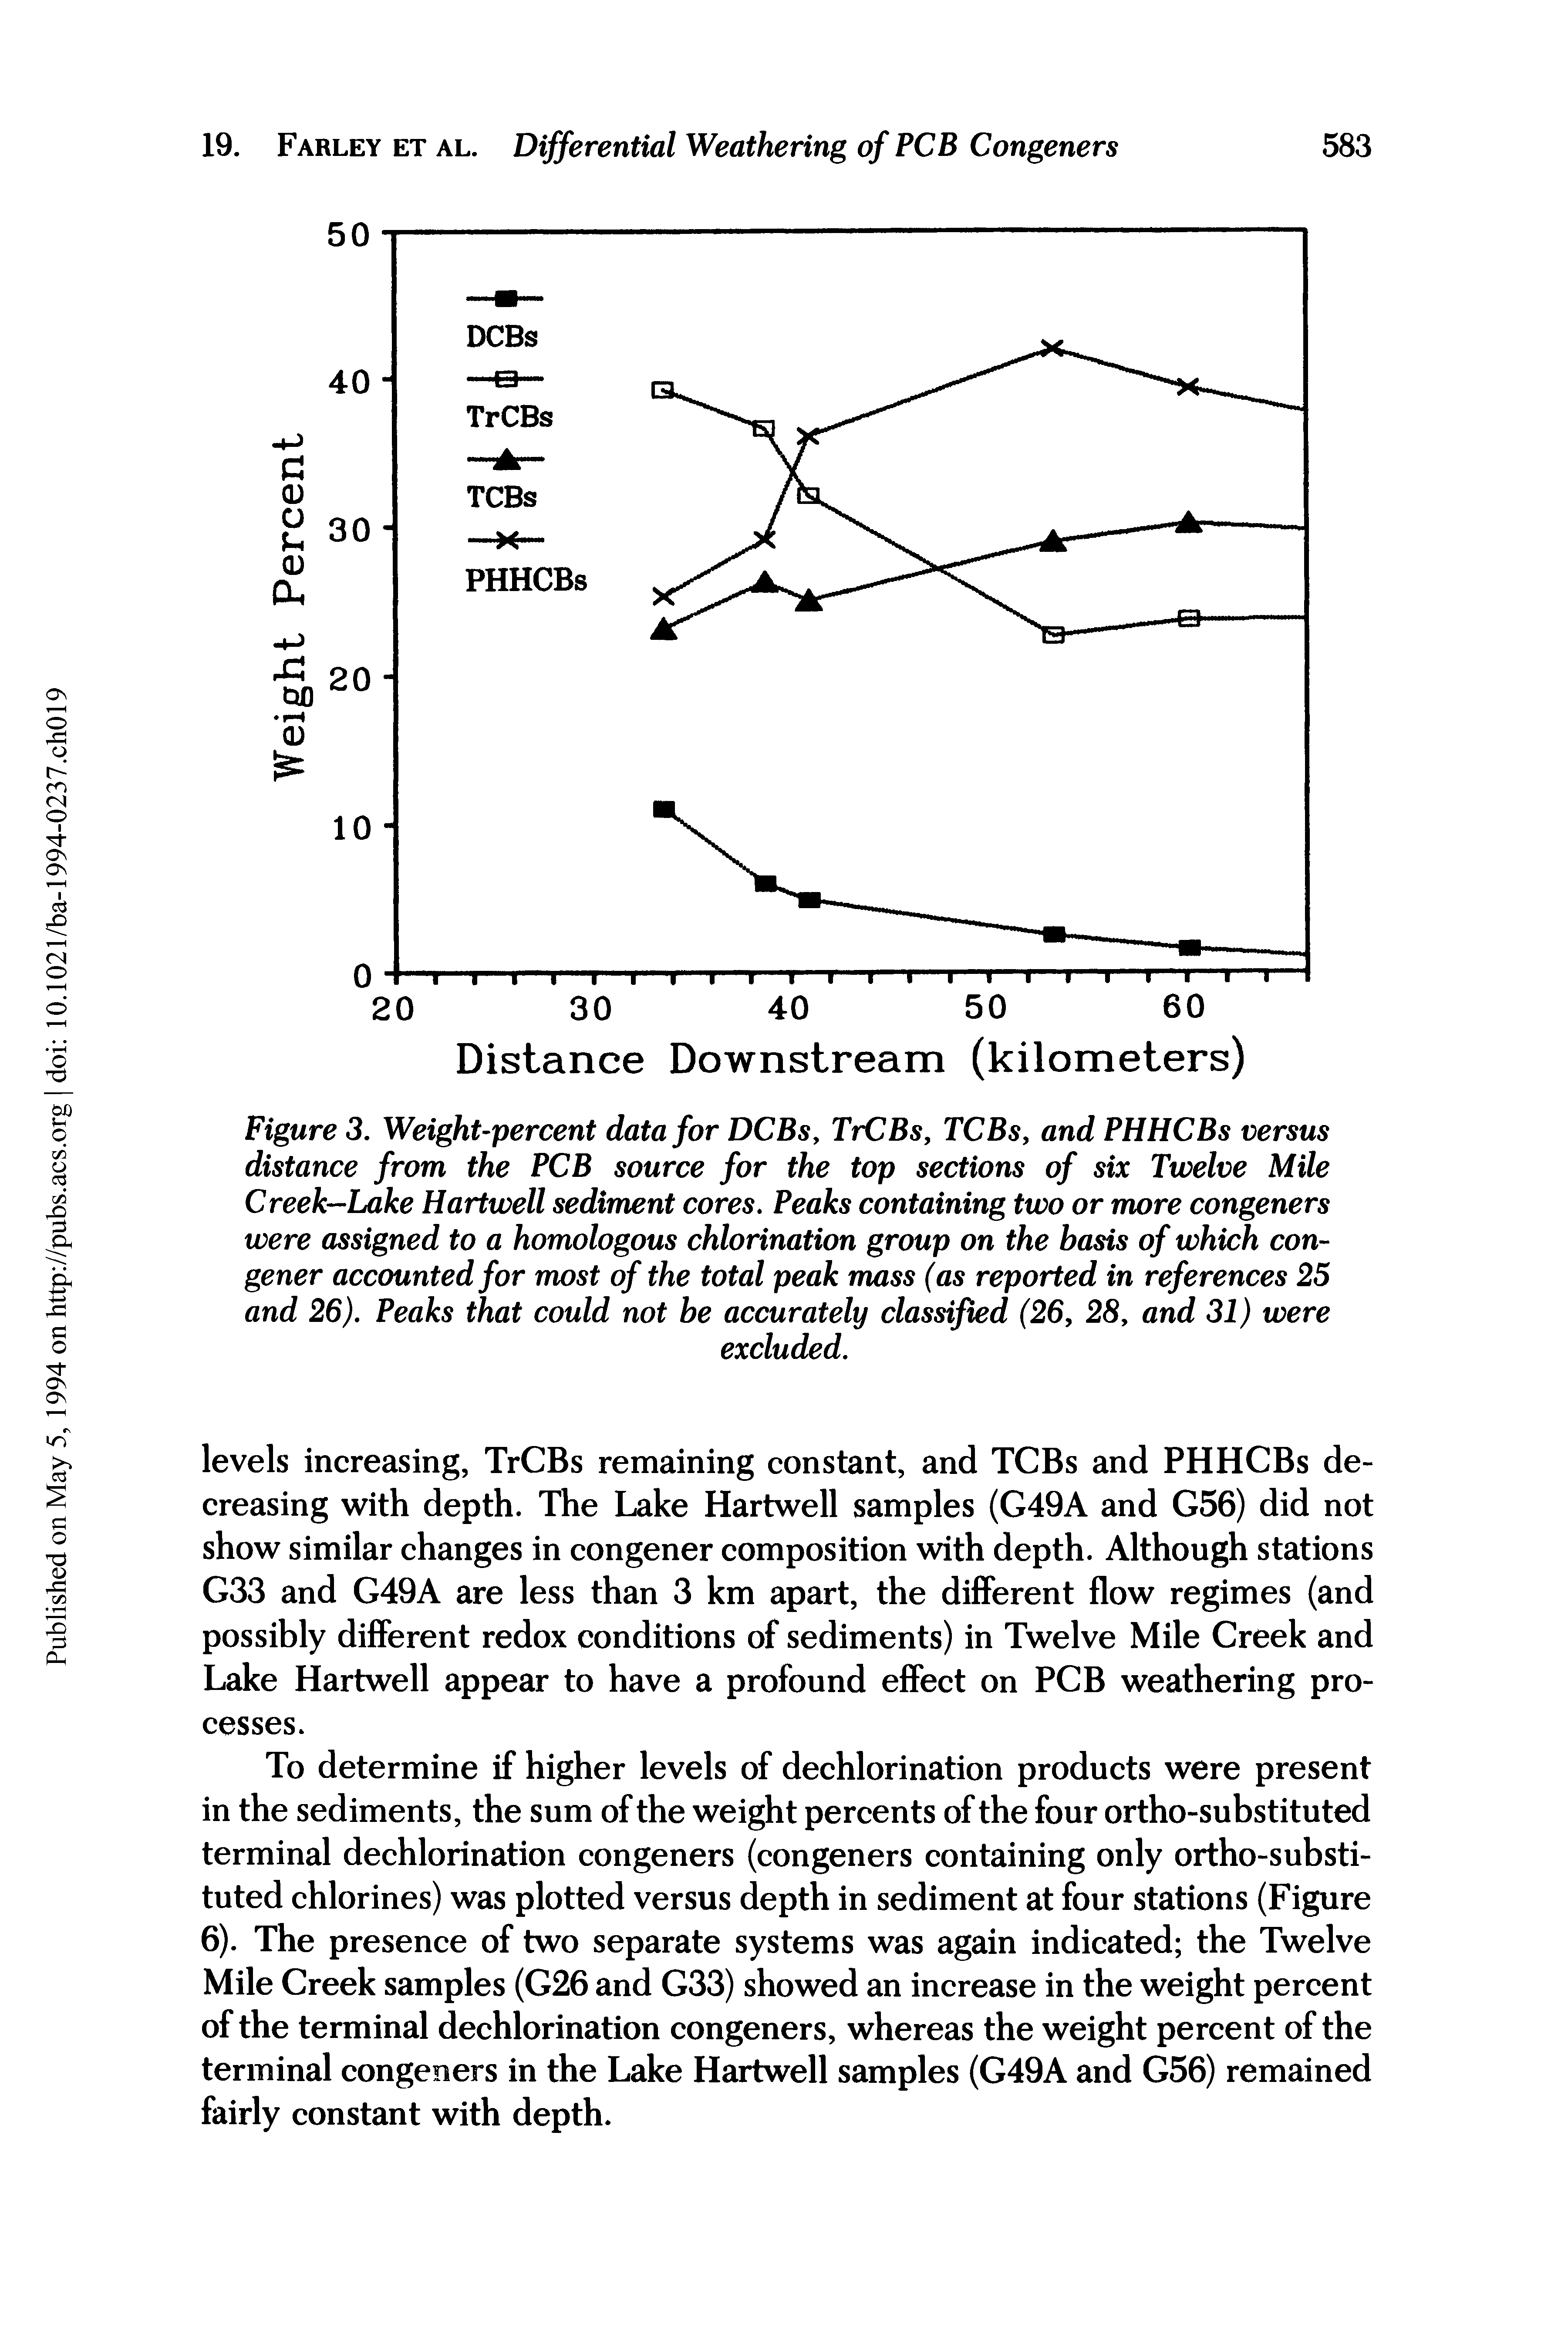 Figure 3. Weight-percent data for DCBsy TrCBs, TCBs, and PHHCBs versus distance from the PCB source for the top sections of six Twelve Mile Creek-Lake Hartwell sediment cores. Peaks containing two or more congeners were assigned to a homologous chlorination group on the basis of which congener accounted for most of the total peak mass (as reported in references 25 and 26). Peaks that could not be accurately classified (26, 28, and 31) were...